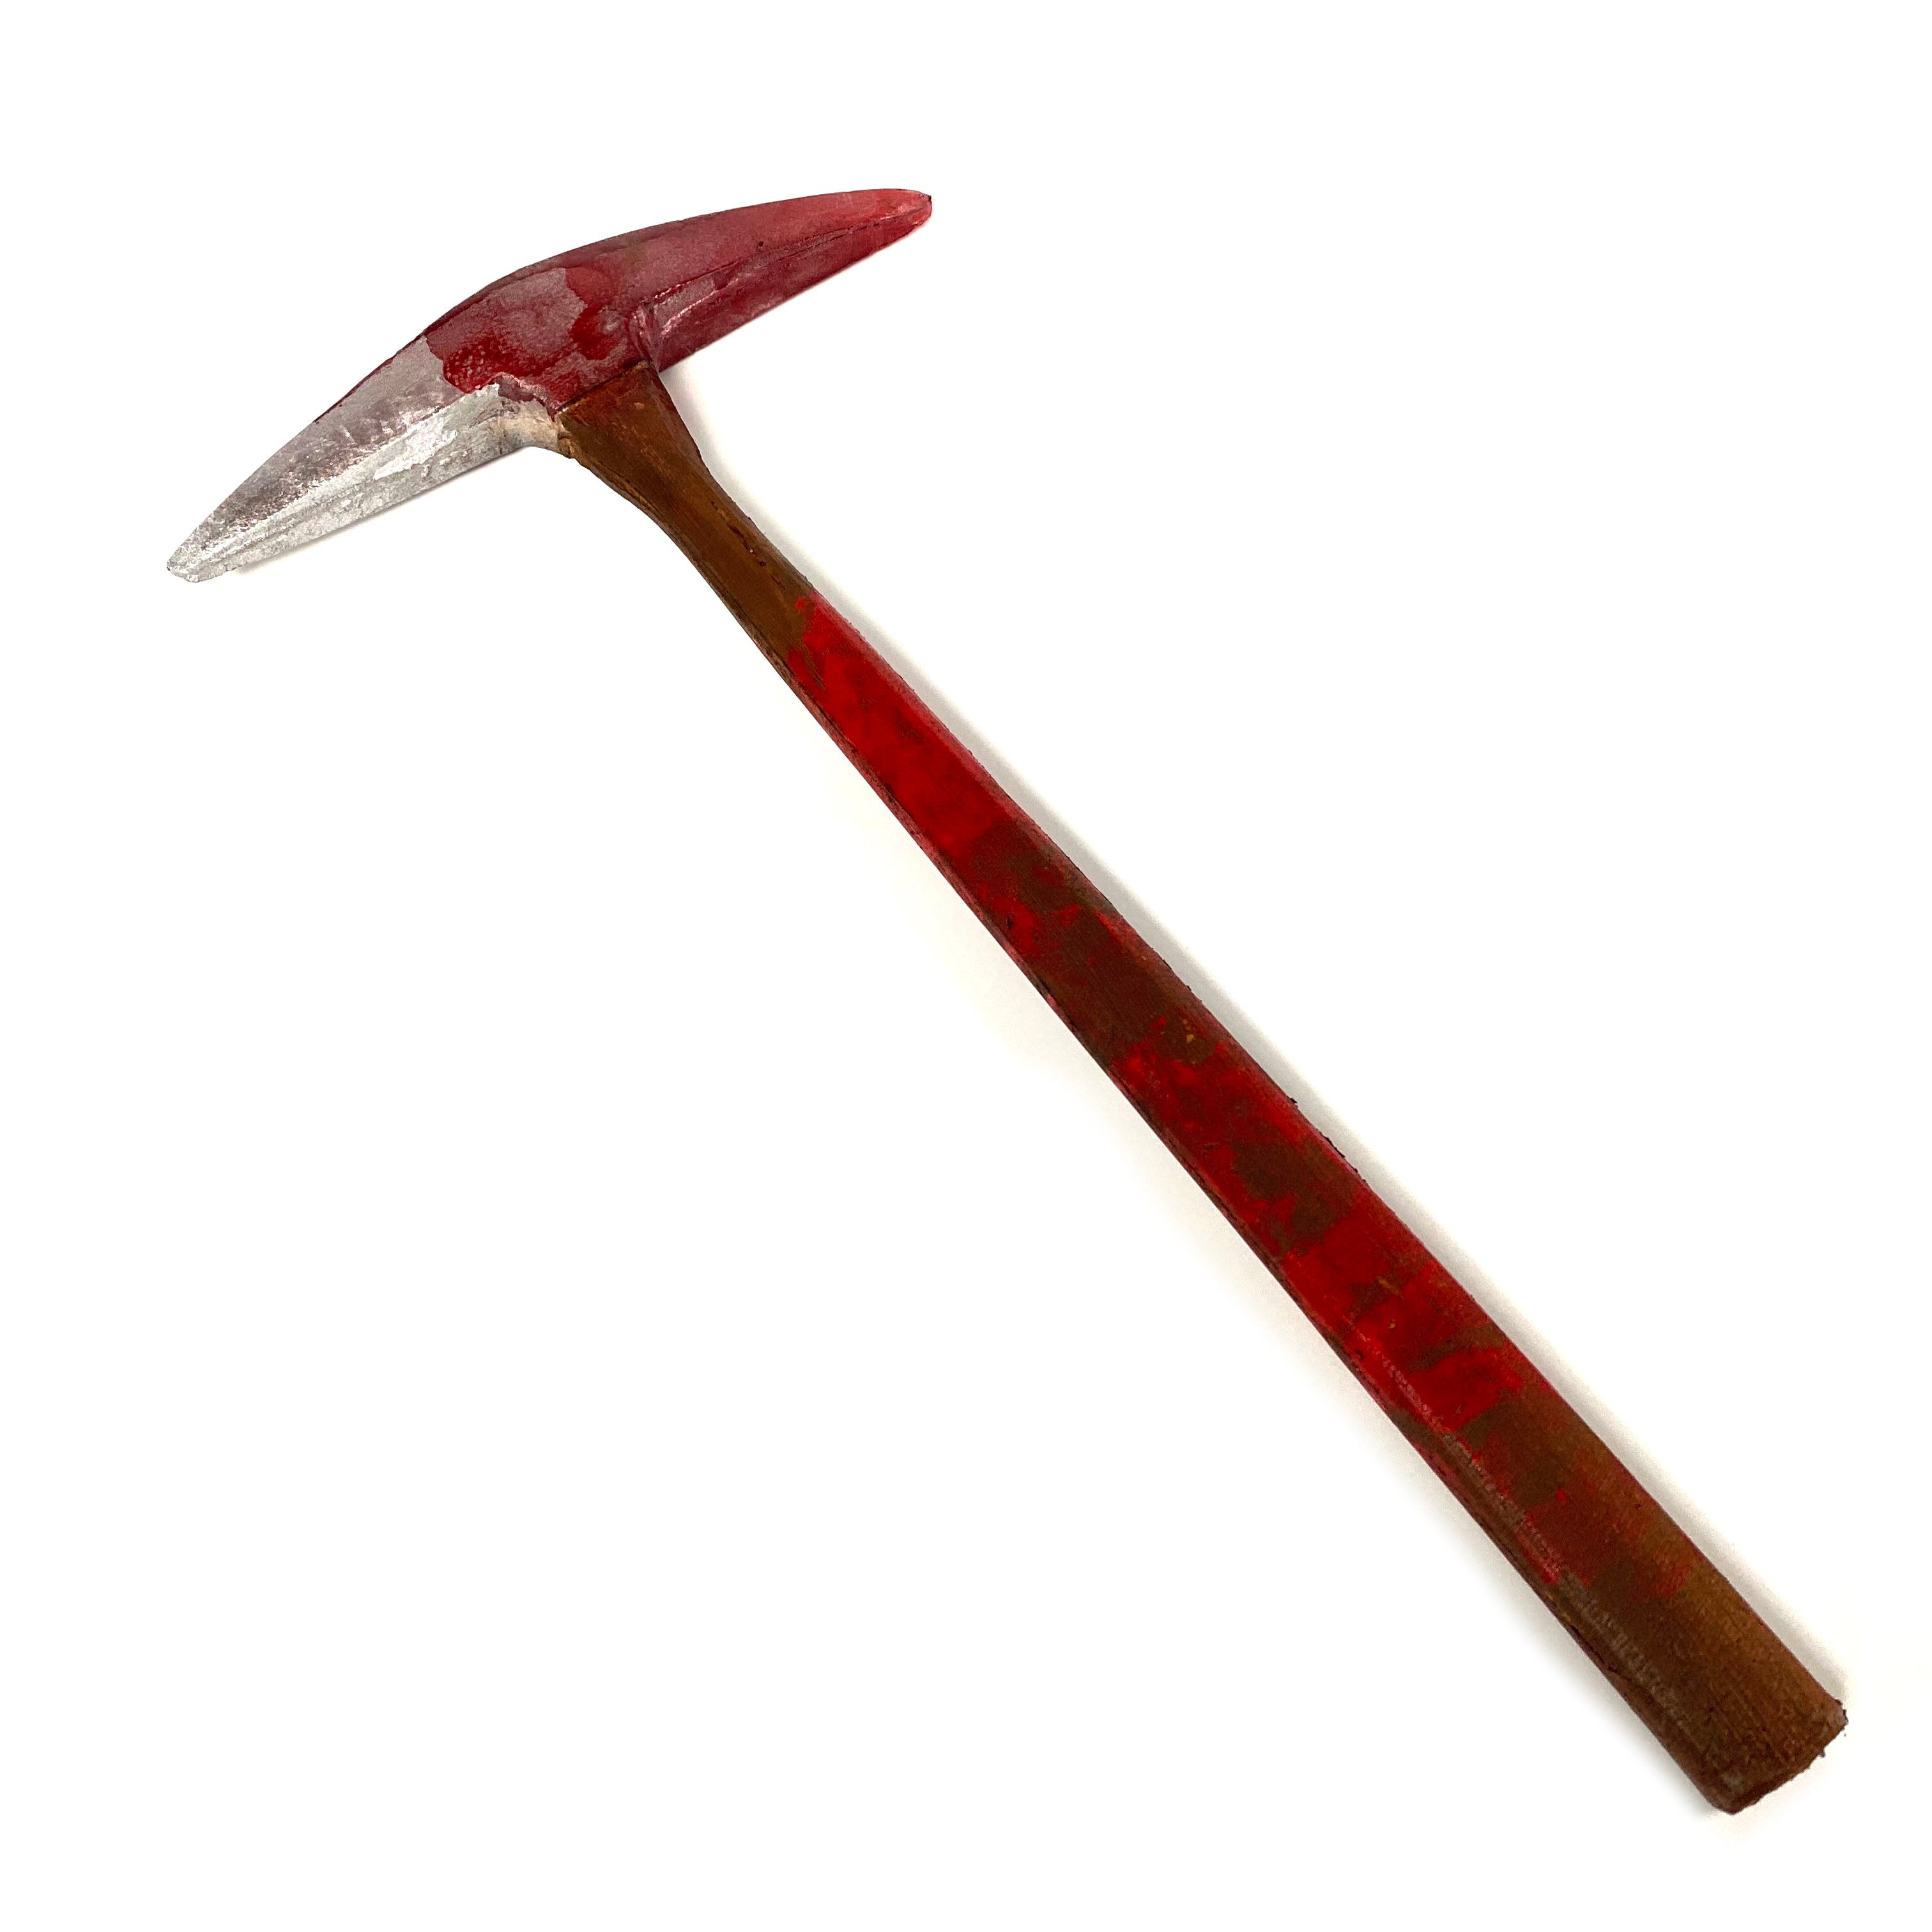 Foam Rubber Hand Pick Axe Stunt Prop - BLOODY - Bloodied Silver Head with Aged Handle